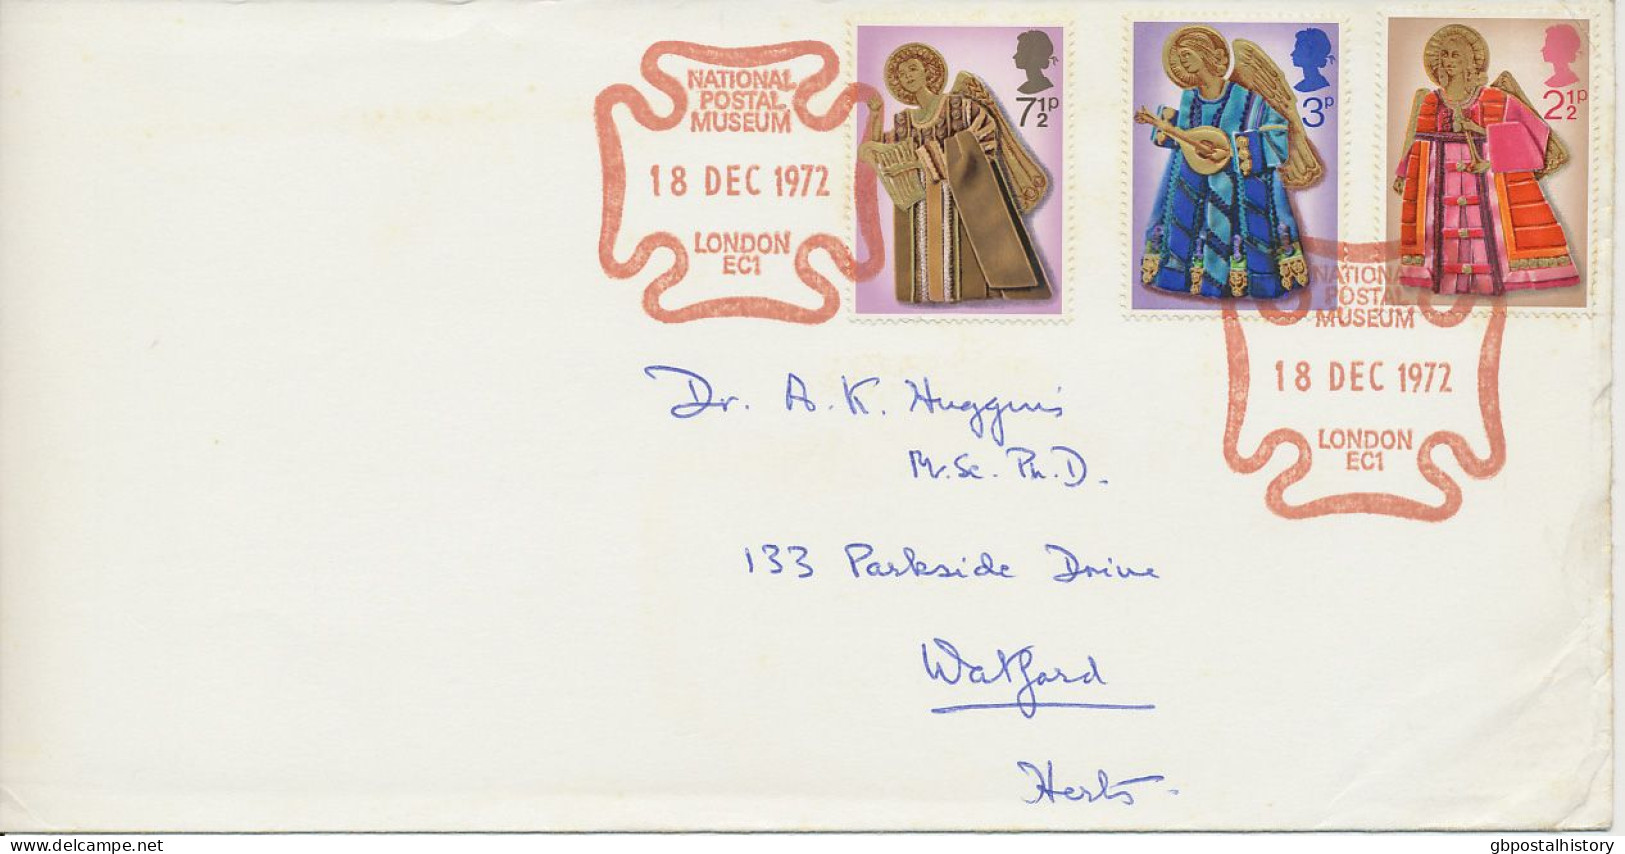 GB SPECIAL EVENT POSTMARKS 1972 NATIONAL POSTAL MUSEUM LONDON EC1 - STRUCK IN BROWN-RED, SMALL FAULTS – ADRESSED TO THE - Lettres & Documents